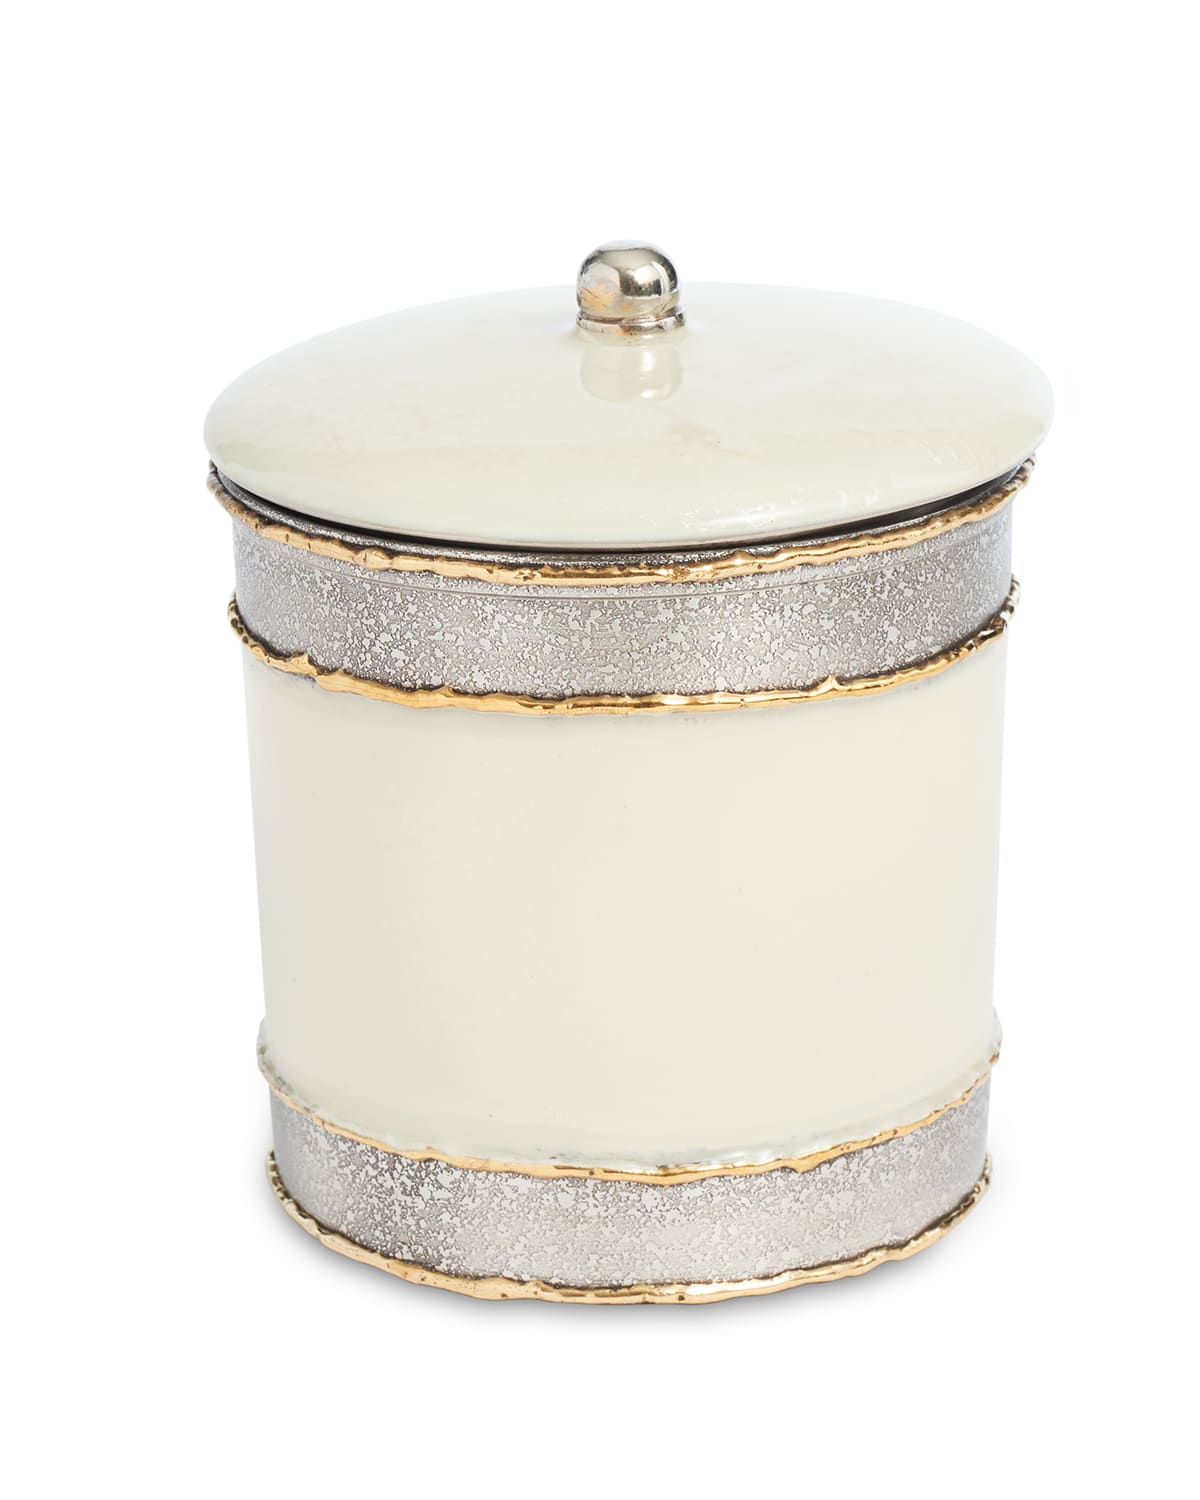 Image Julia Knight Cascade 5.5" Covered Canister